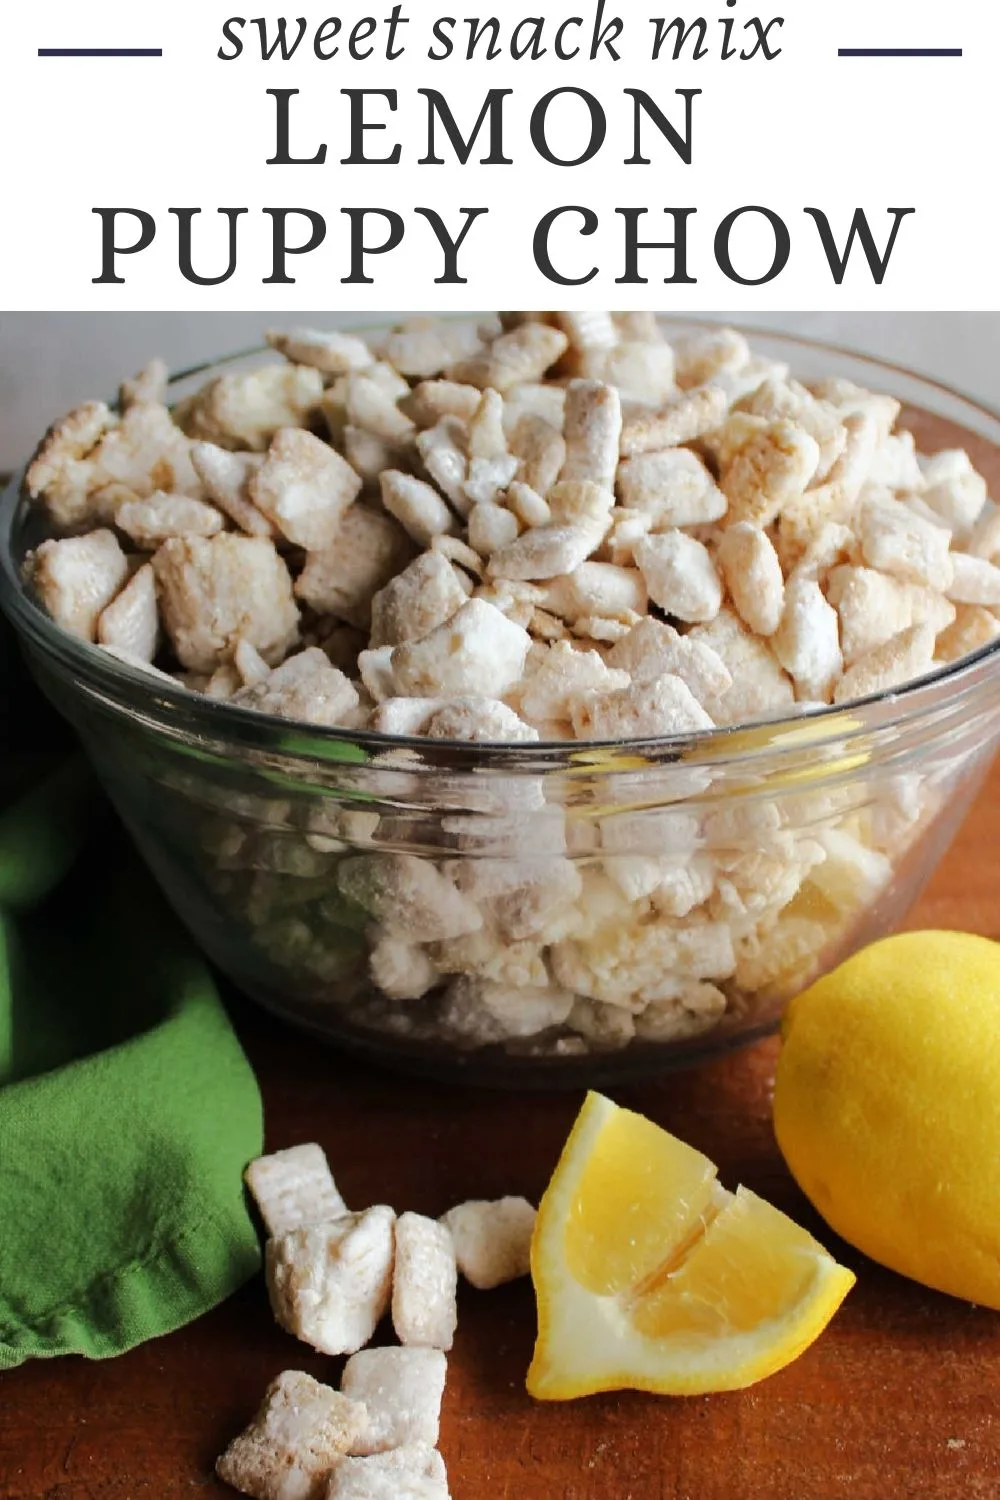 Lemon puppy chow is a fun citrus and vanilla twist on classic muddy buddies. It is bright and easy to make.